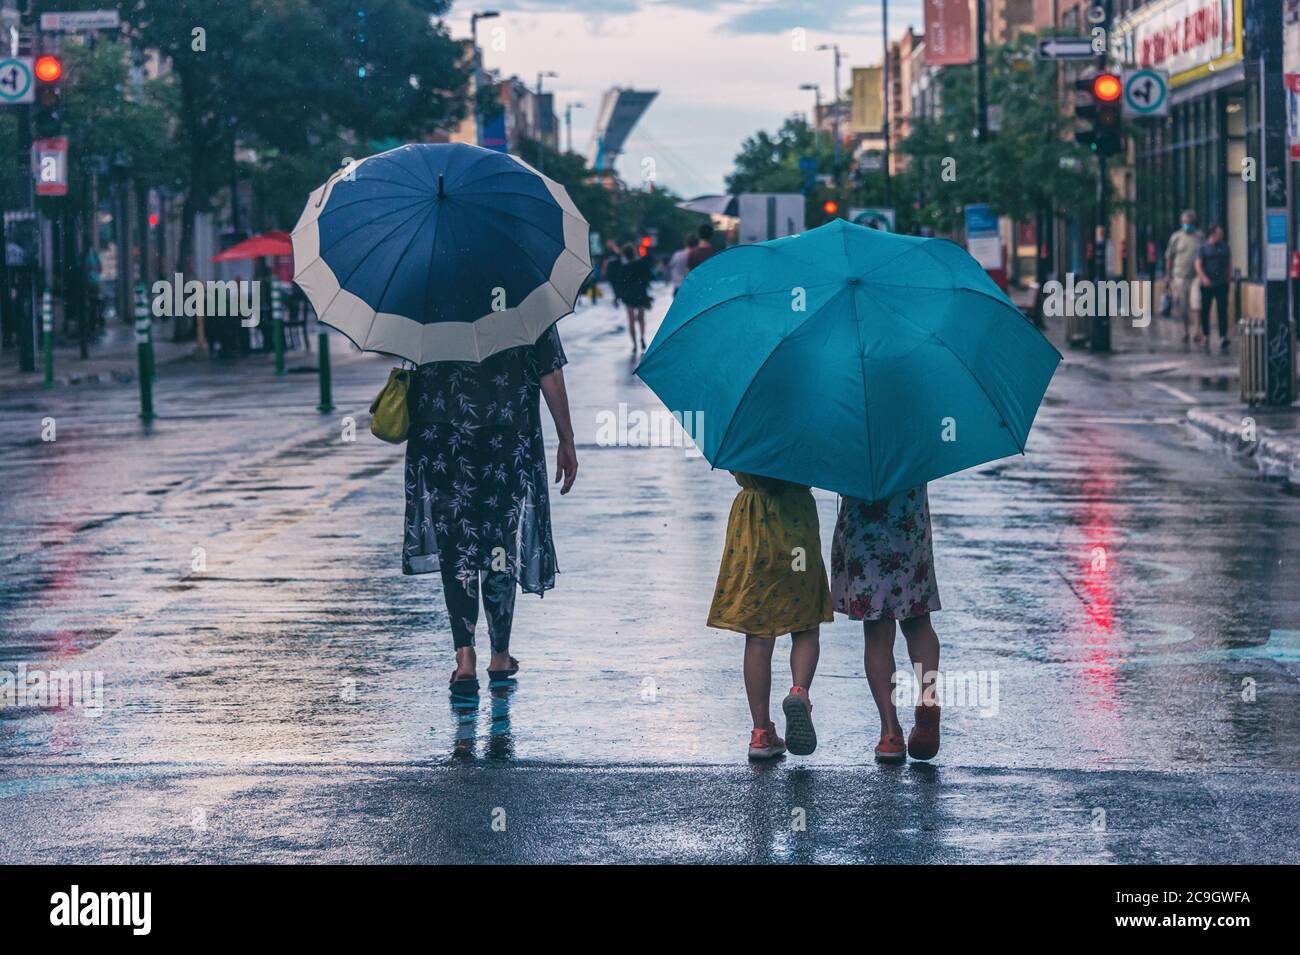 https://c8.alamy.com/comp/2C9GWFA/montreal-ca-30-july-2020-mother-and-daughters-on-mont-royal-avenue-holding-umbrellas-during-rain-storm-2C9GWFA.jpg